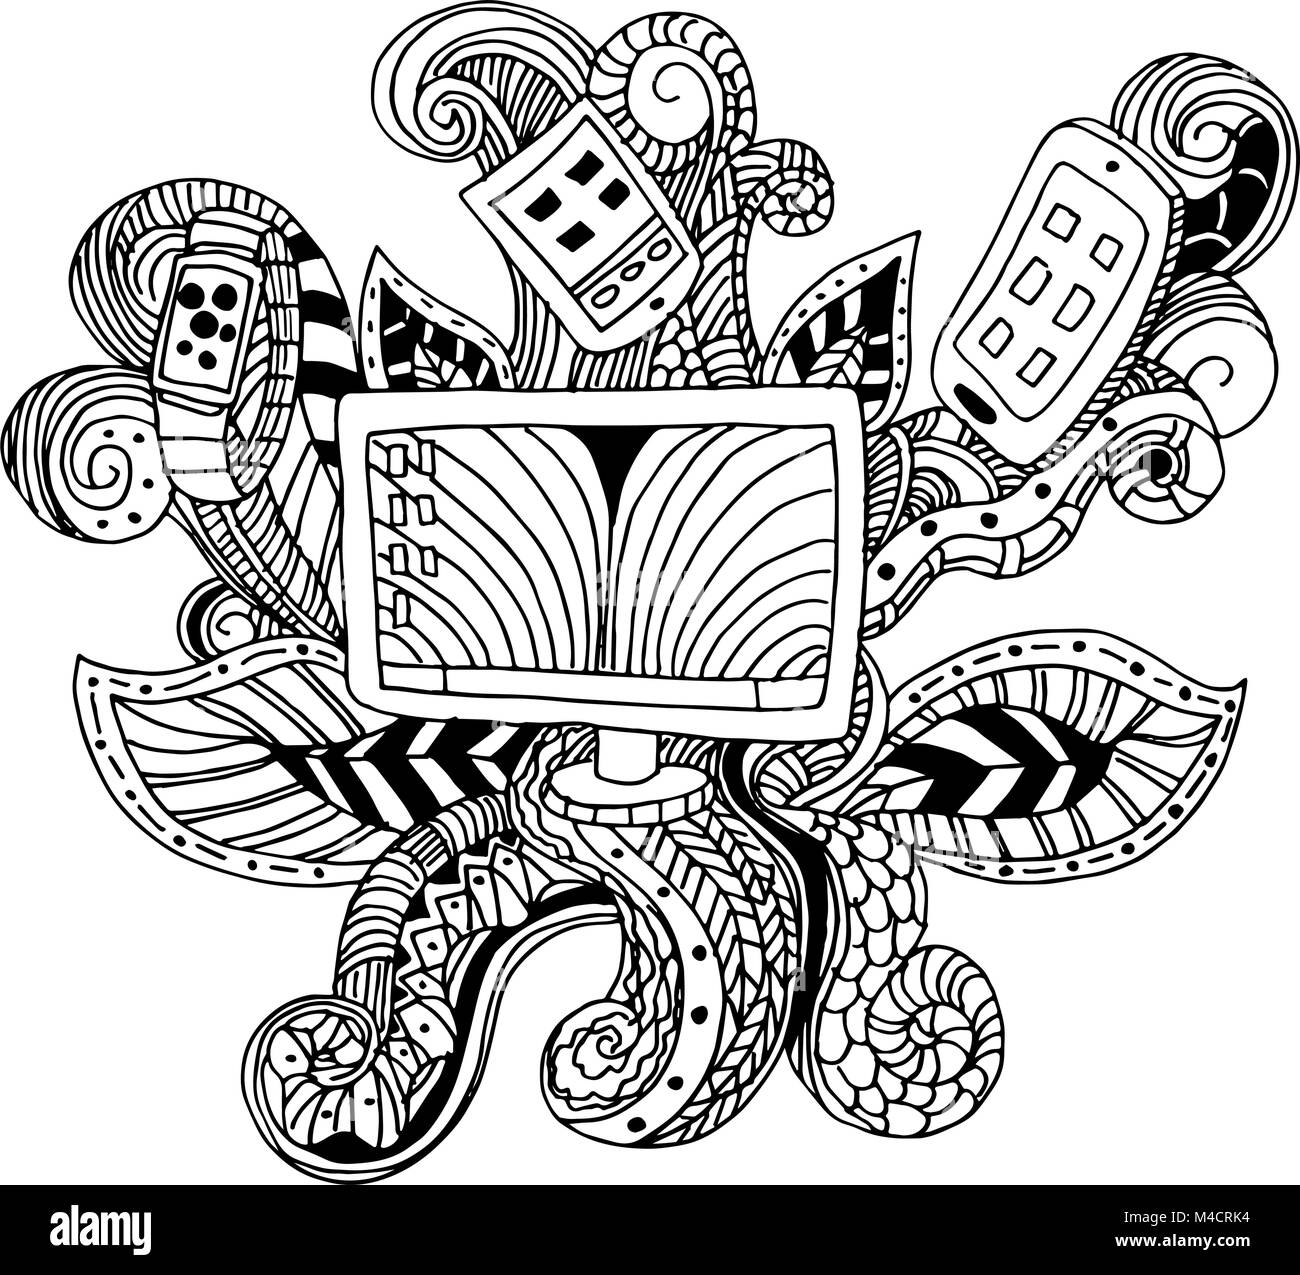 An image of a technology icon - zentangle style. Stock Vector